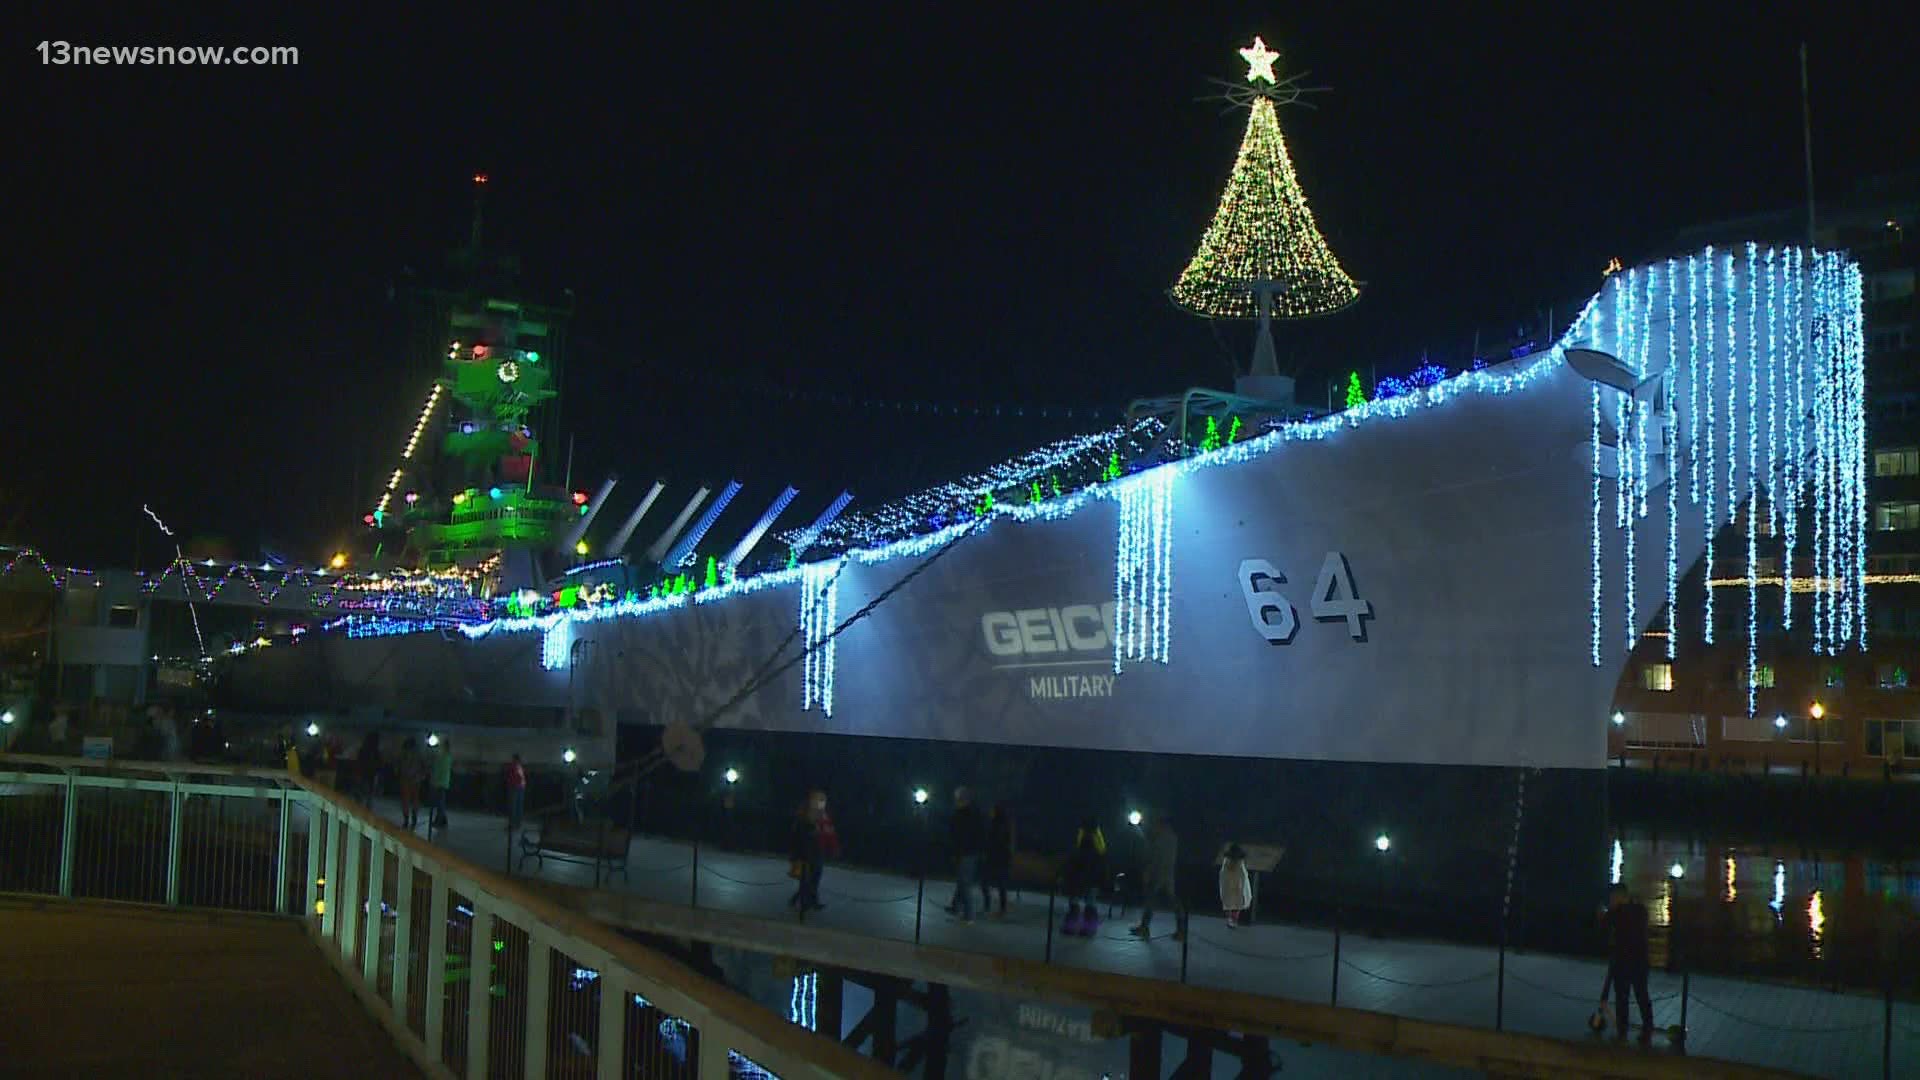 Nauticus is kicked off its first-ever 'WinterFest on the Wisconsin' event Saturday, bringing the holiday fun to the large battleship.